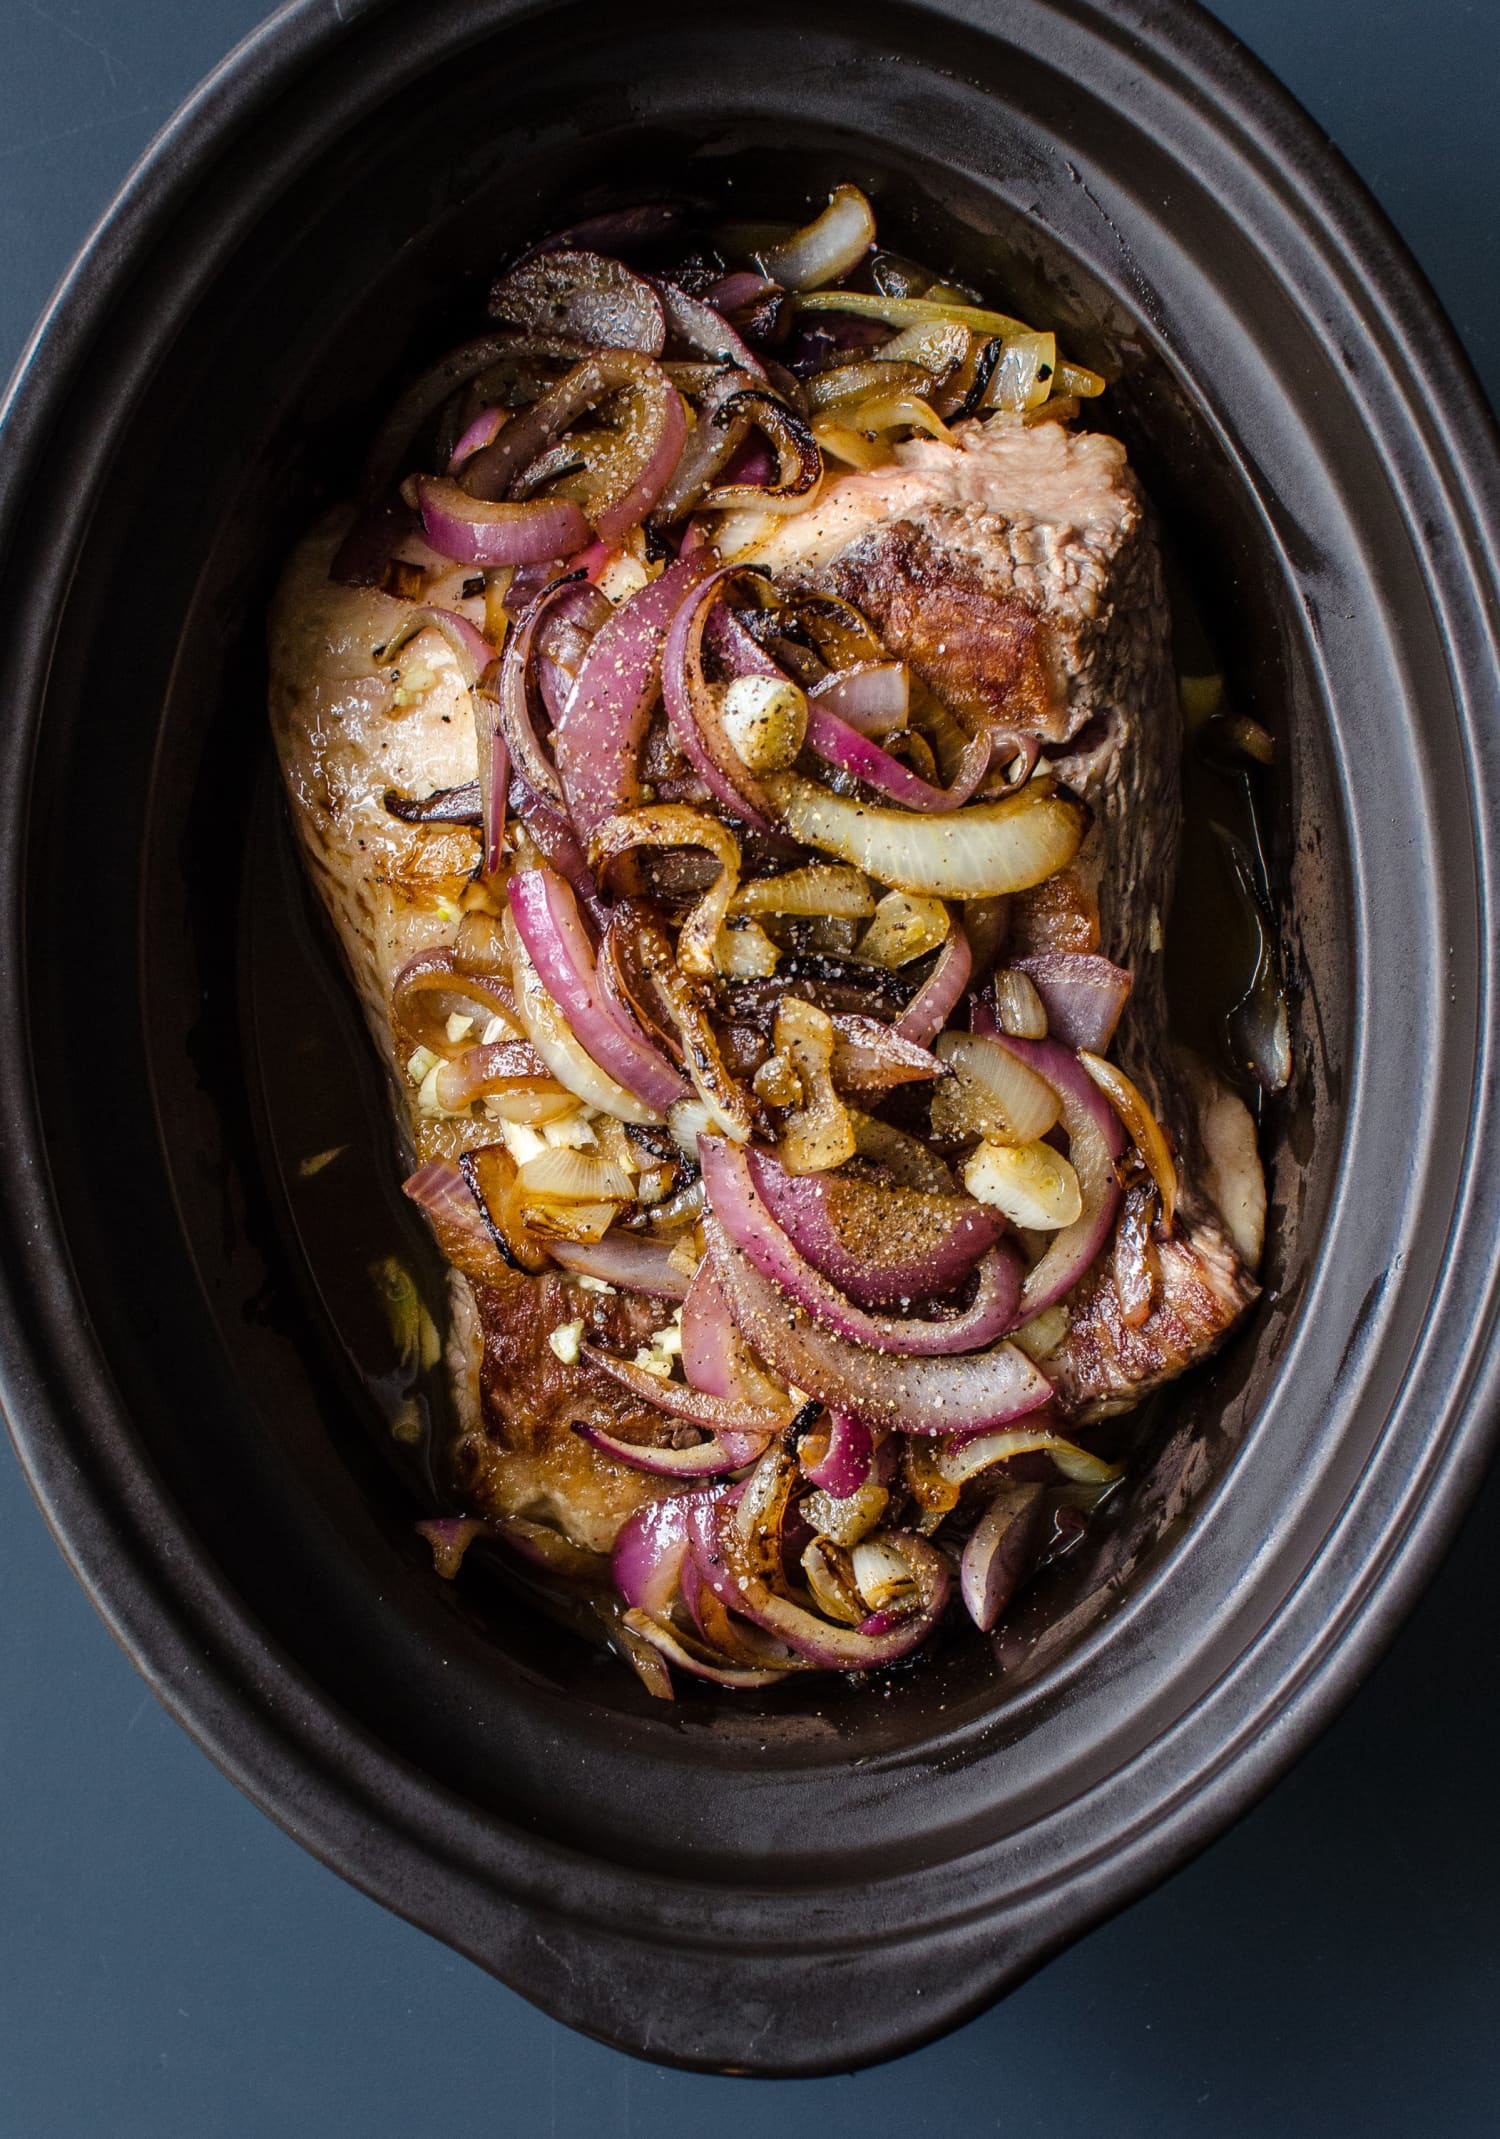 Easy Slow Cooker Brisket and Onions Recipe | Kitchn